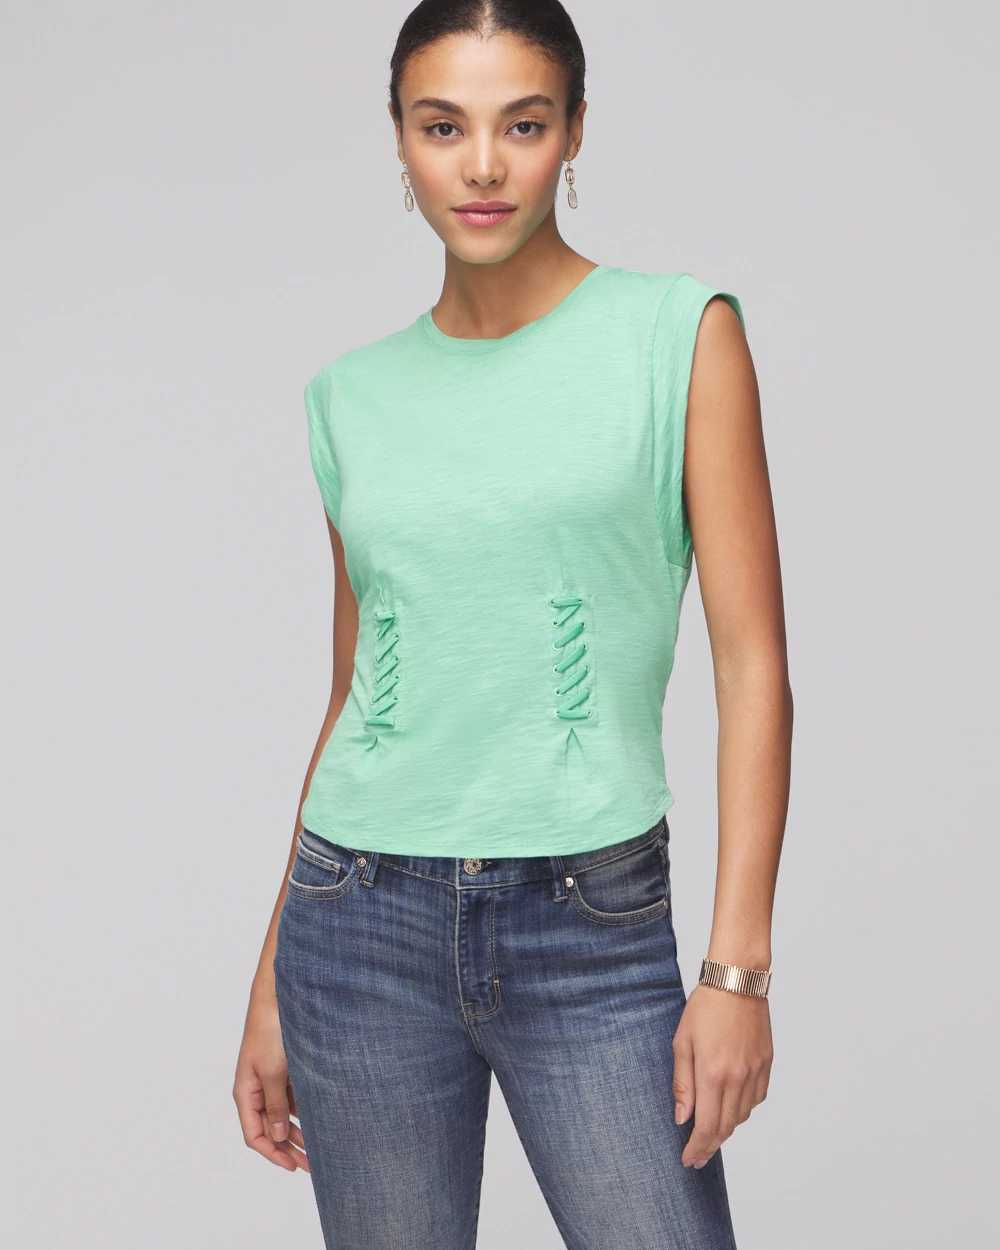 Lace-Up Bodice Tee